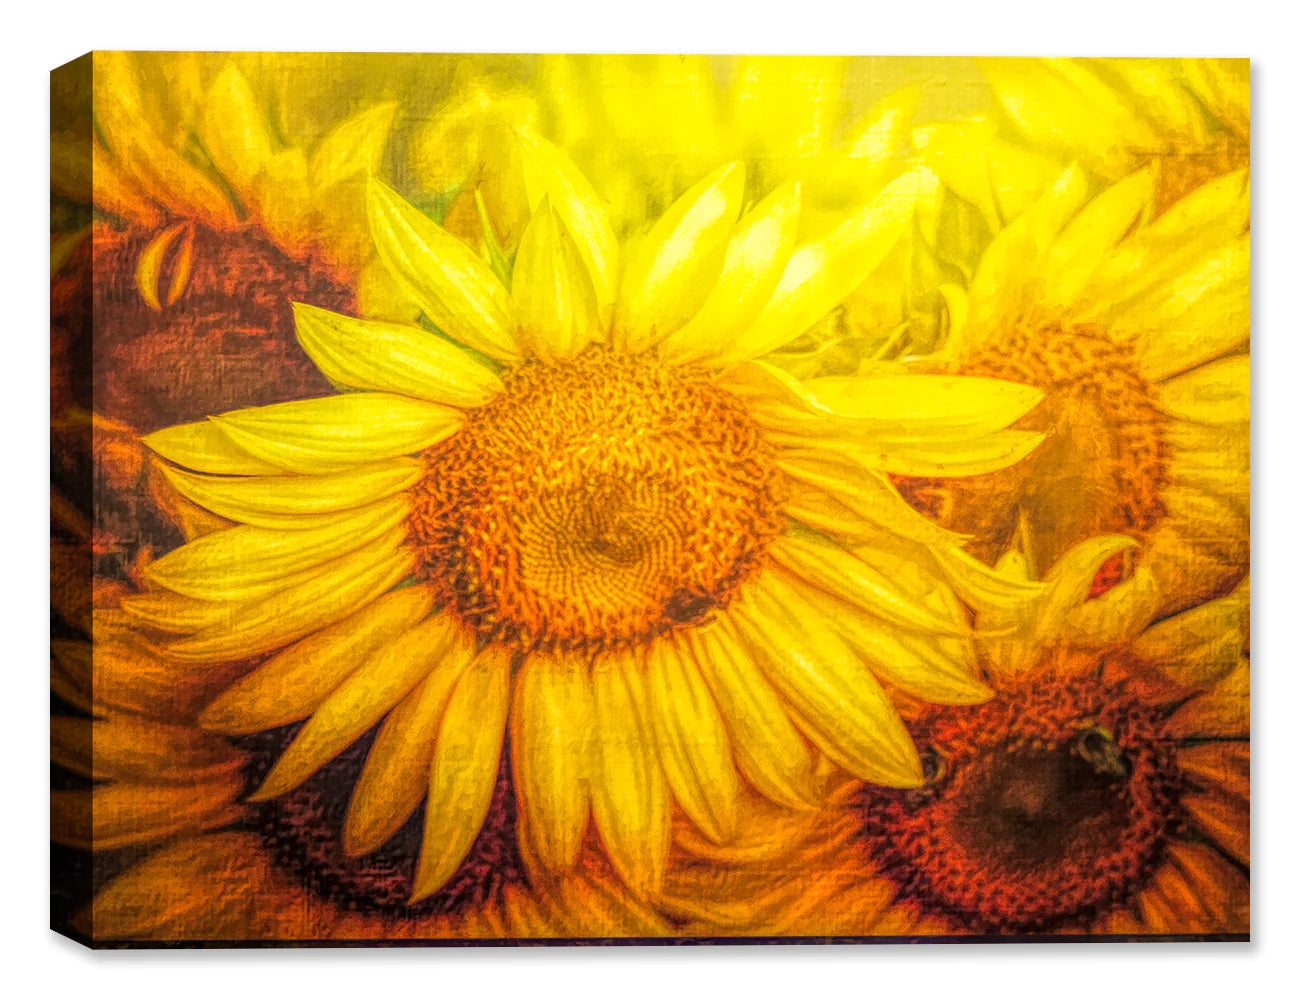 Sunflower Images - Fine Art Photography and Paintings